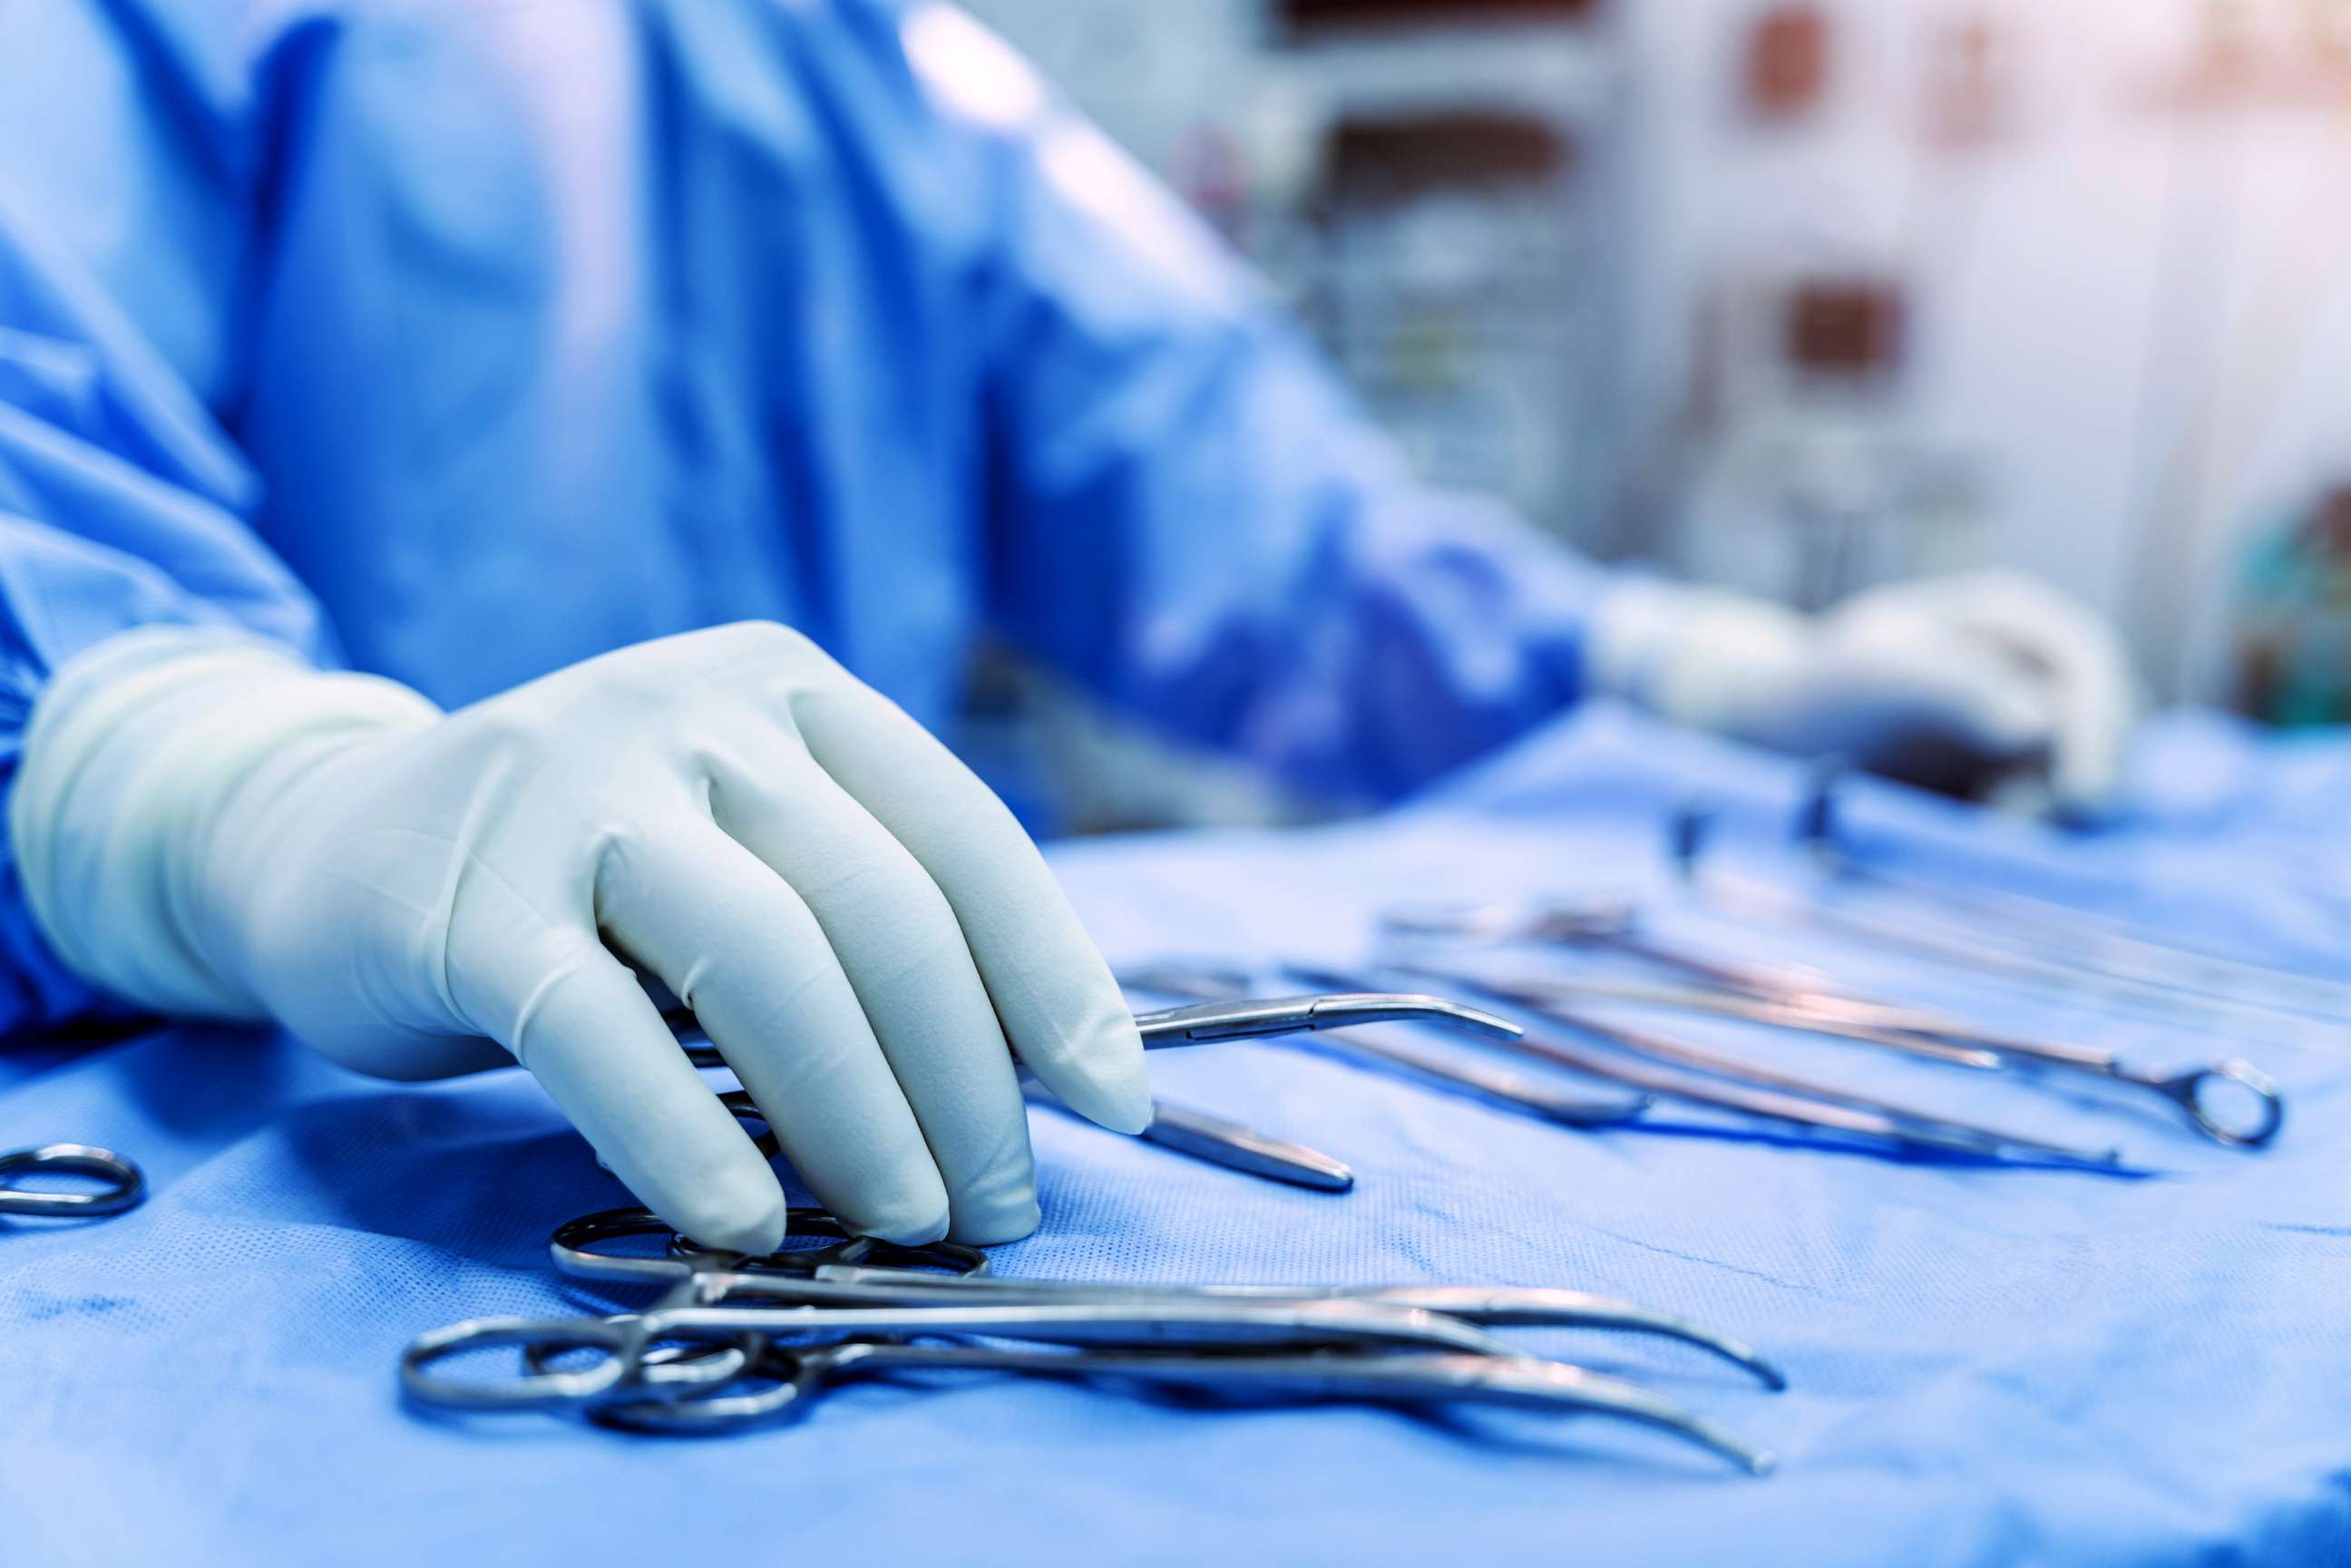 PHOTO: Stock photo of surgical instruments being prepped for use.